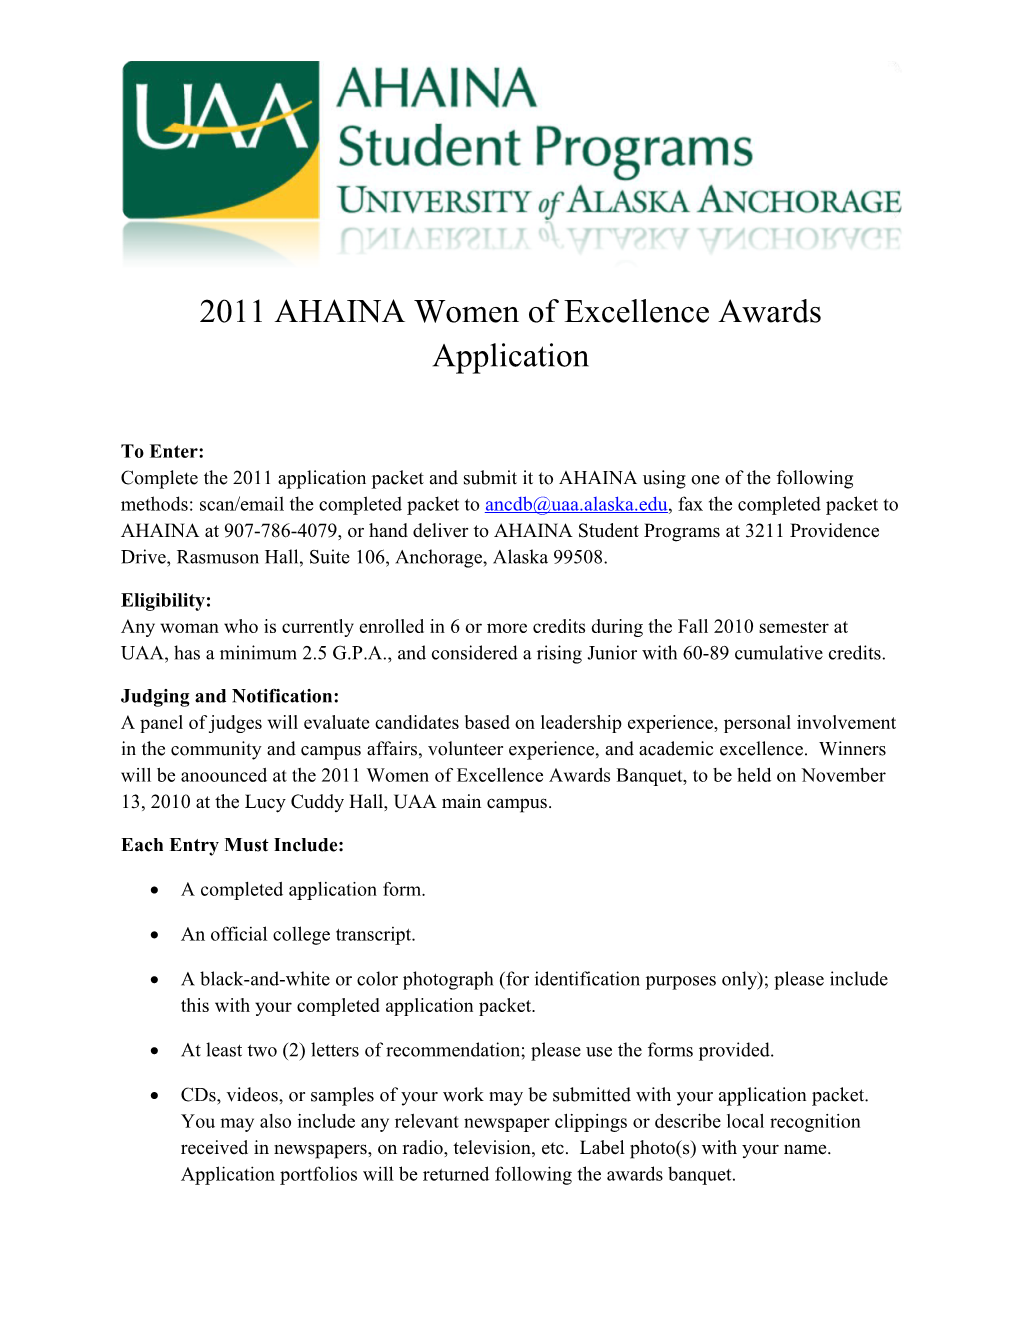 2011 AHAINA Women of Excellence Awards Application